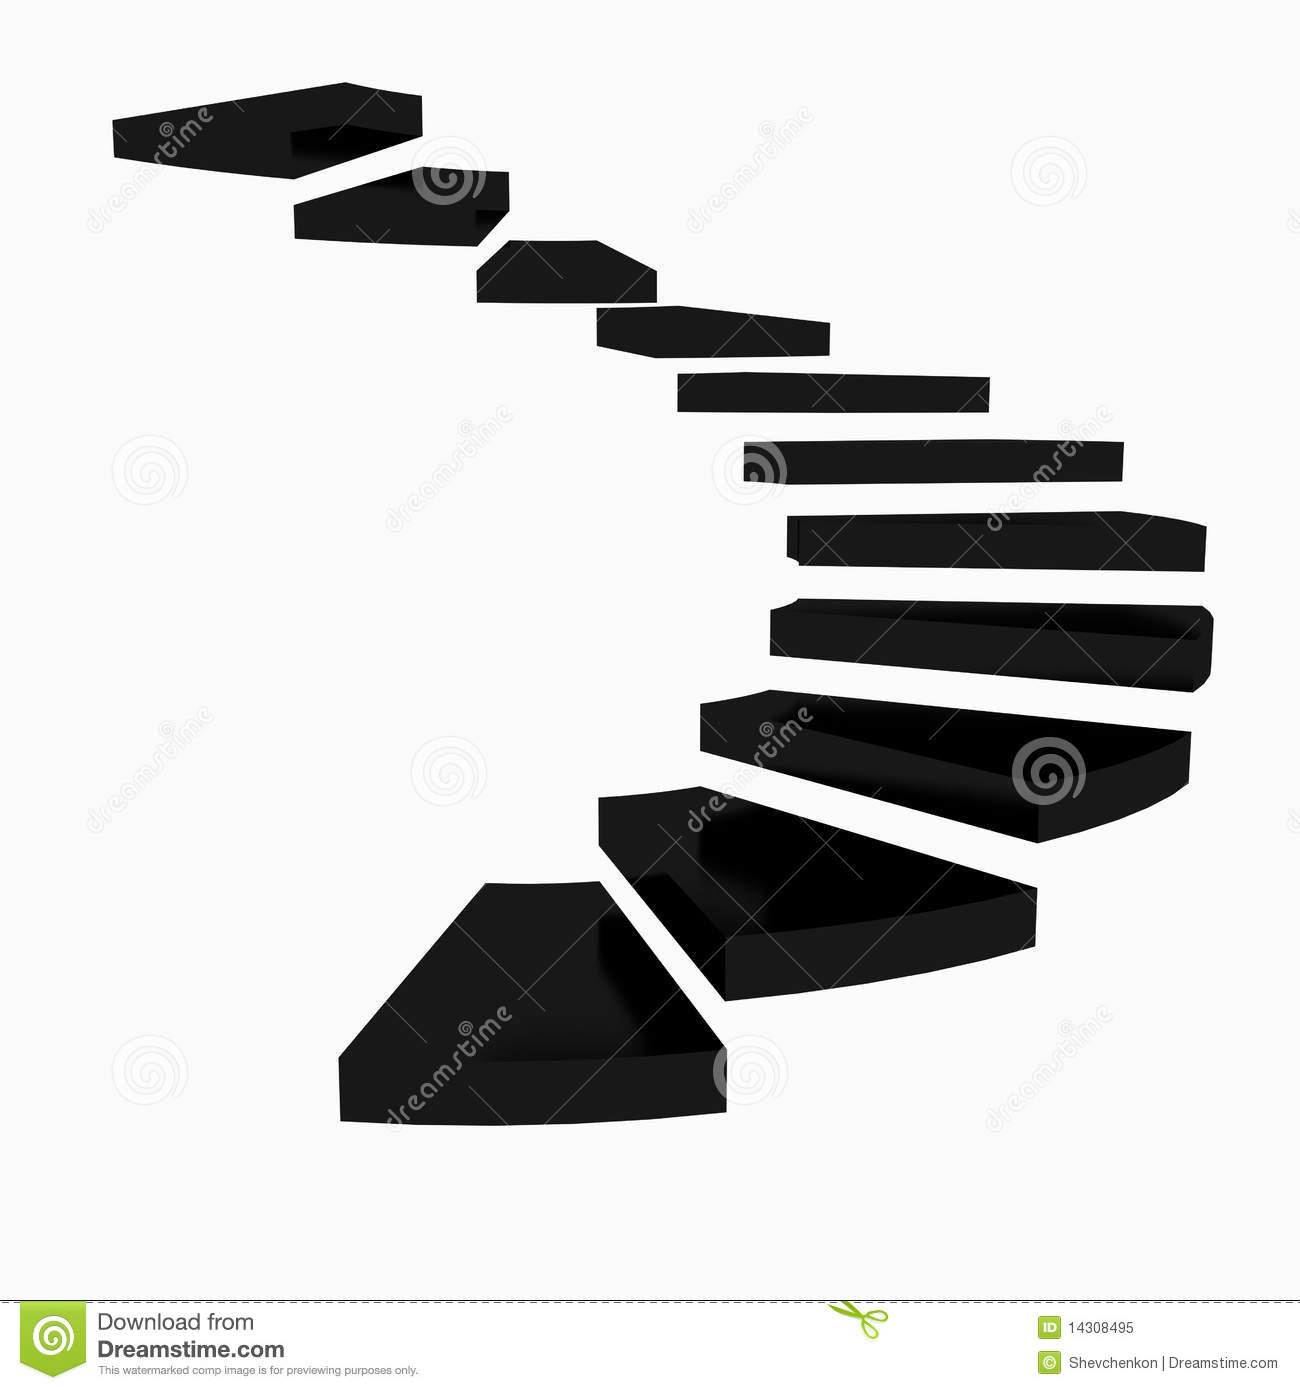 Spiral Staircase Royalty Free Stock Photo   Image  14308495